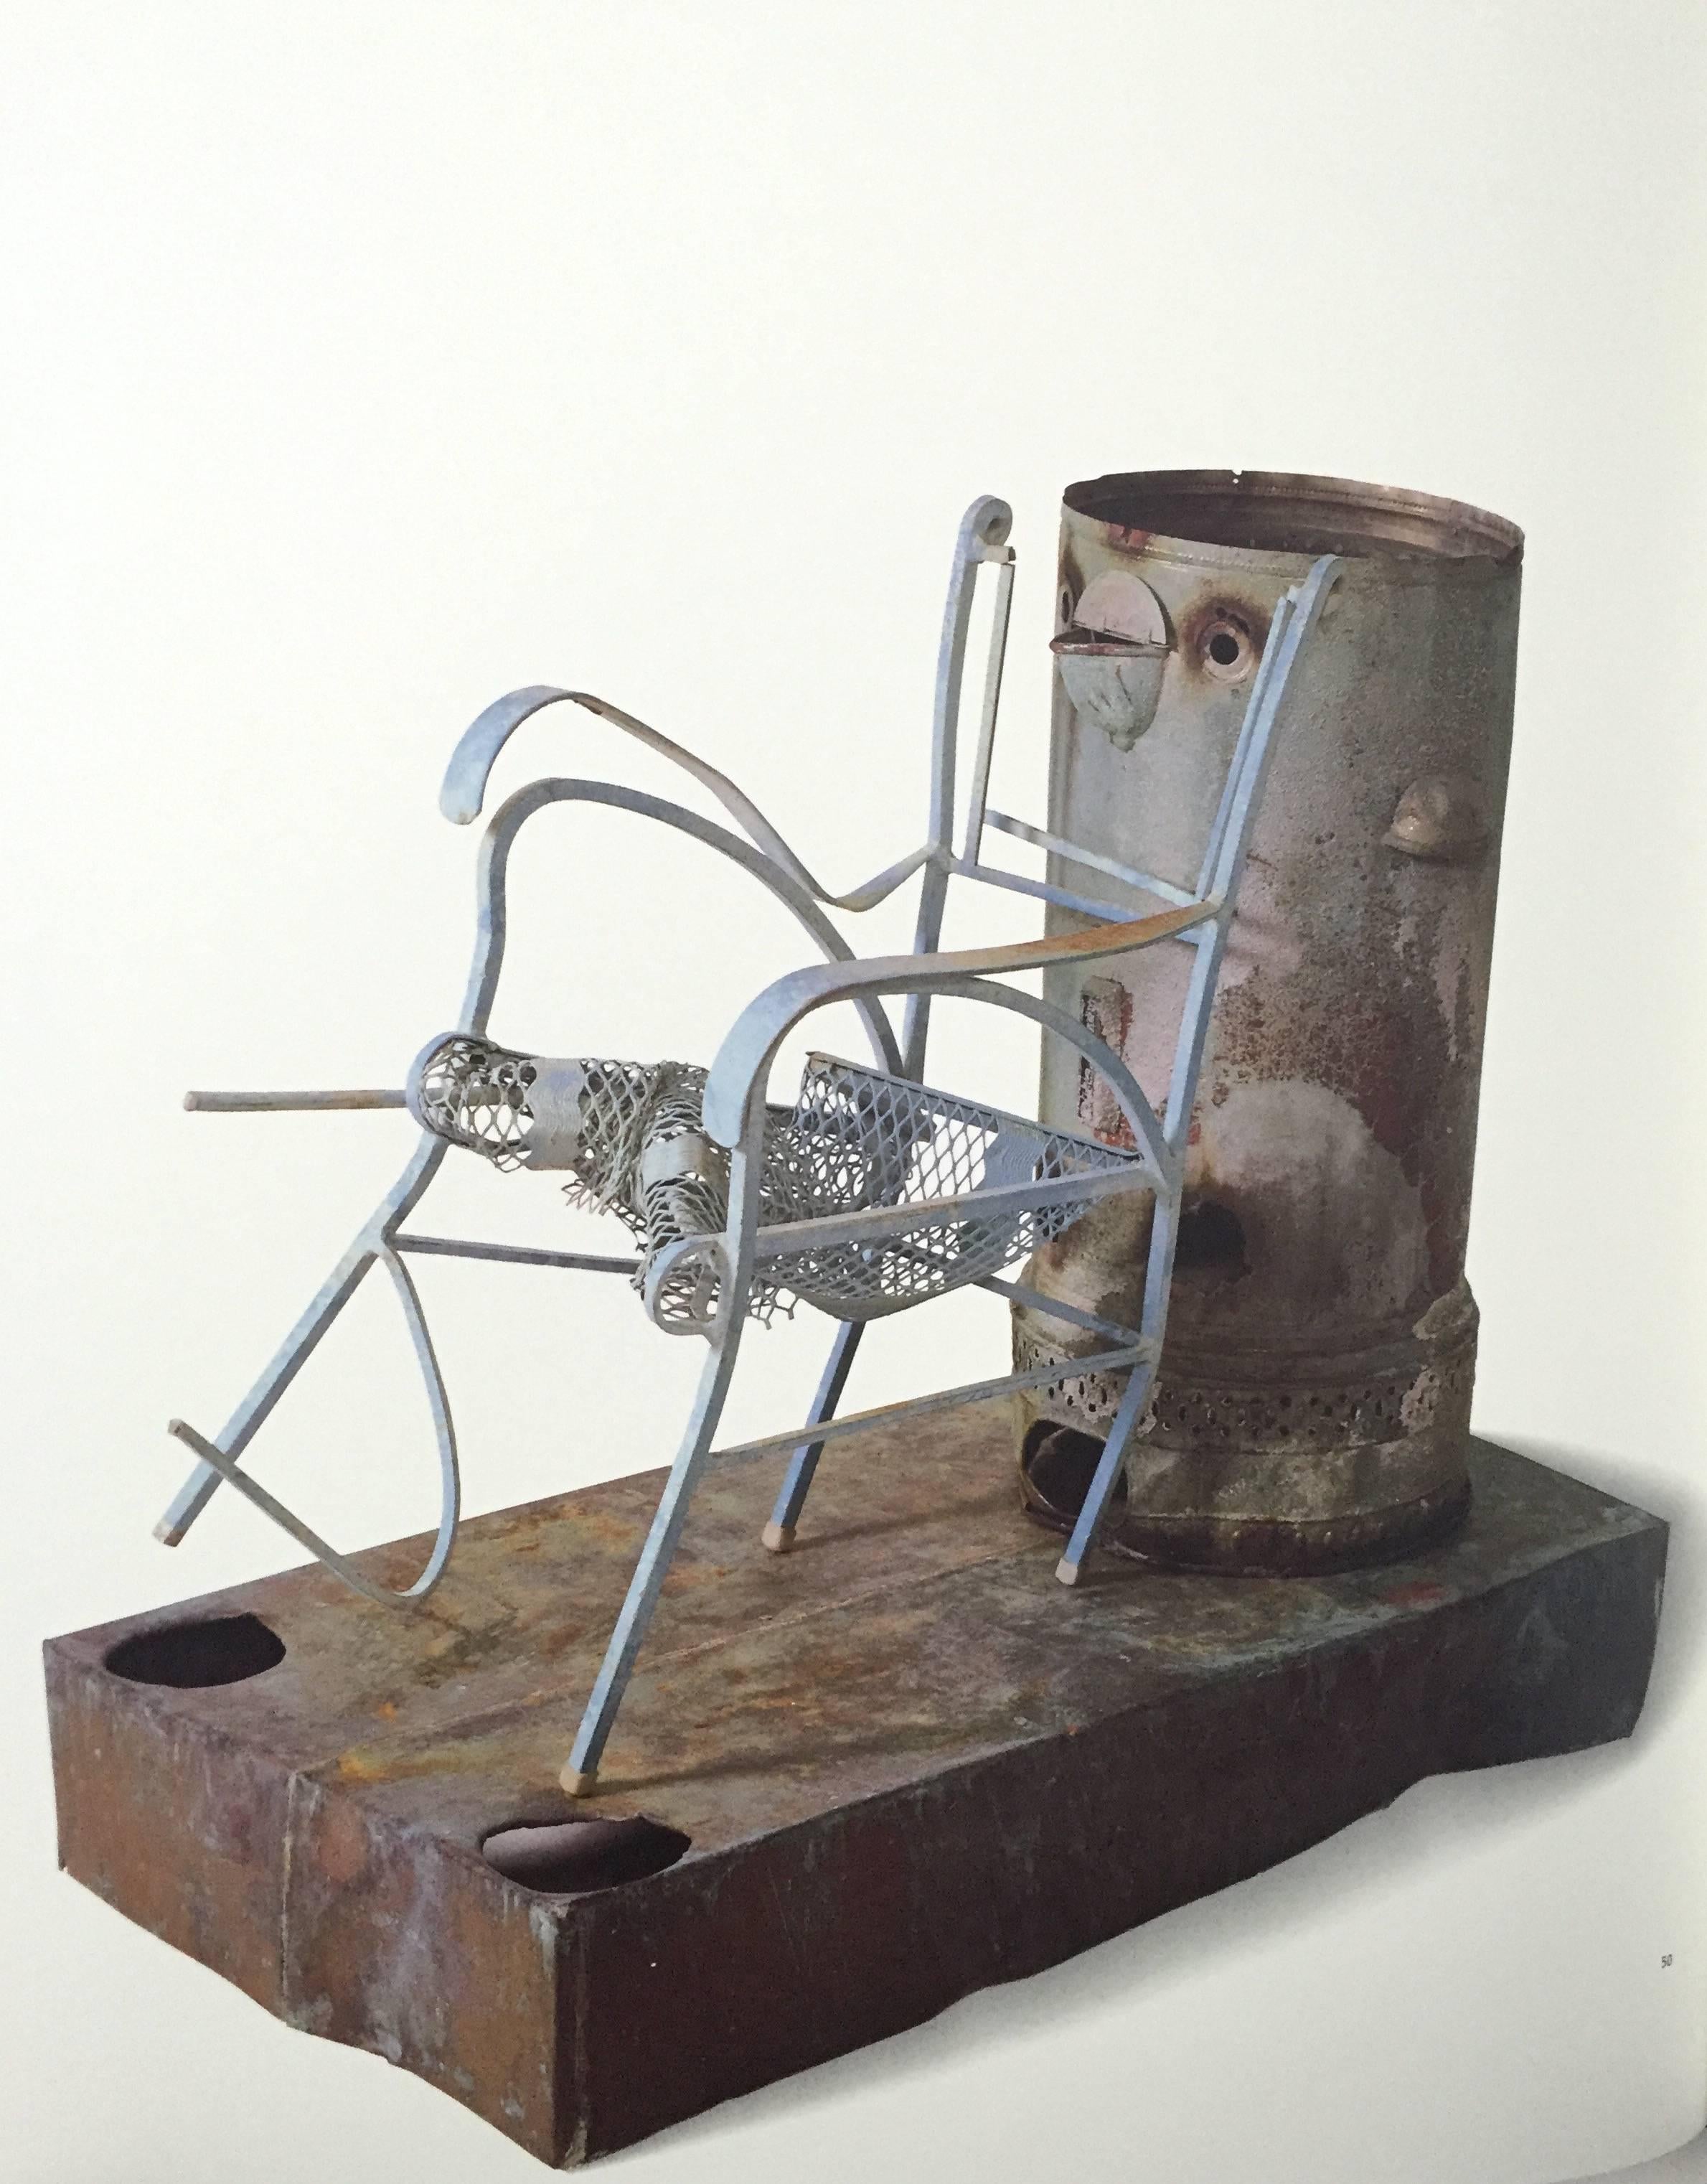 First edition.
Published by the Modern Art Museum of Fort Worth, 1995.

Delve deeper into the sculptural works of the highly influential and prolific American artist, Robert Rauschenberg. Published on the occasion of this exhibition, with over